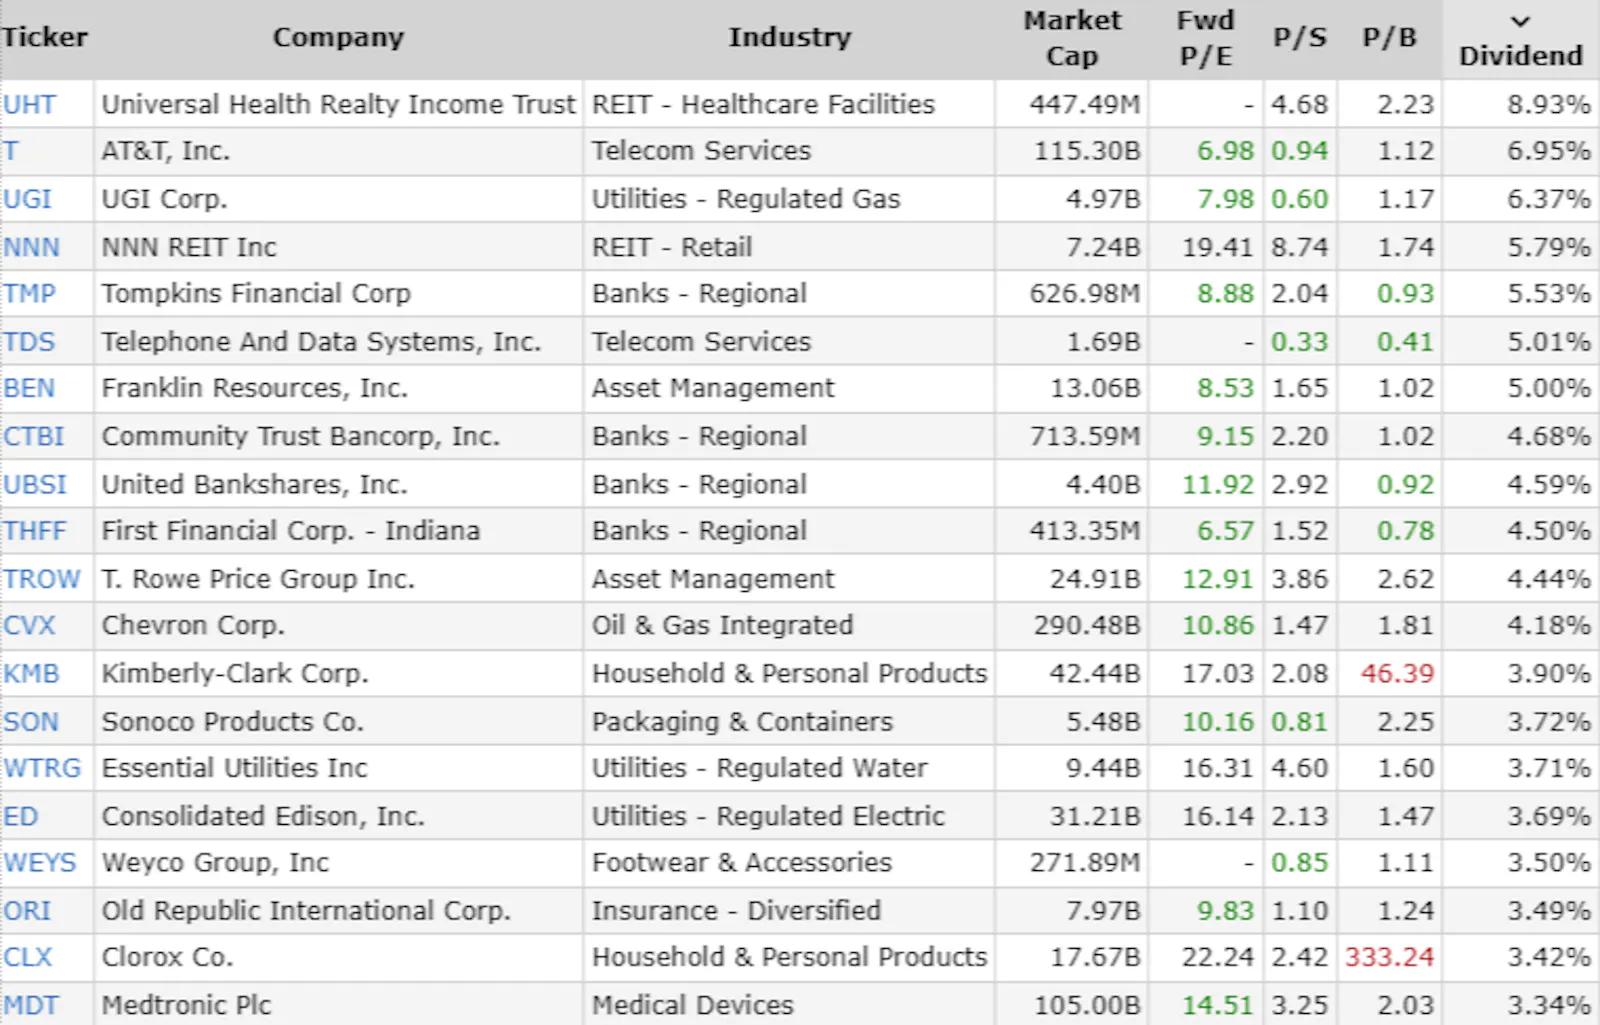 Top high-yield stocks: UHT in healthcare REIT, AT&T in telecom, UGI in gas utilities, NNN in retail REIT, TMP in regional banking, TDS in telecom, BEN in asset management. Offering dividends ranging from 5.00% to 8.93%, these stocks present compelling opportunities for income-oriented investors seeking stability and growth.